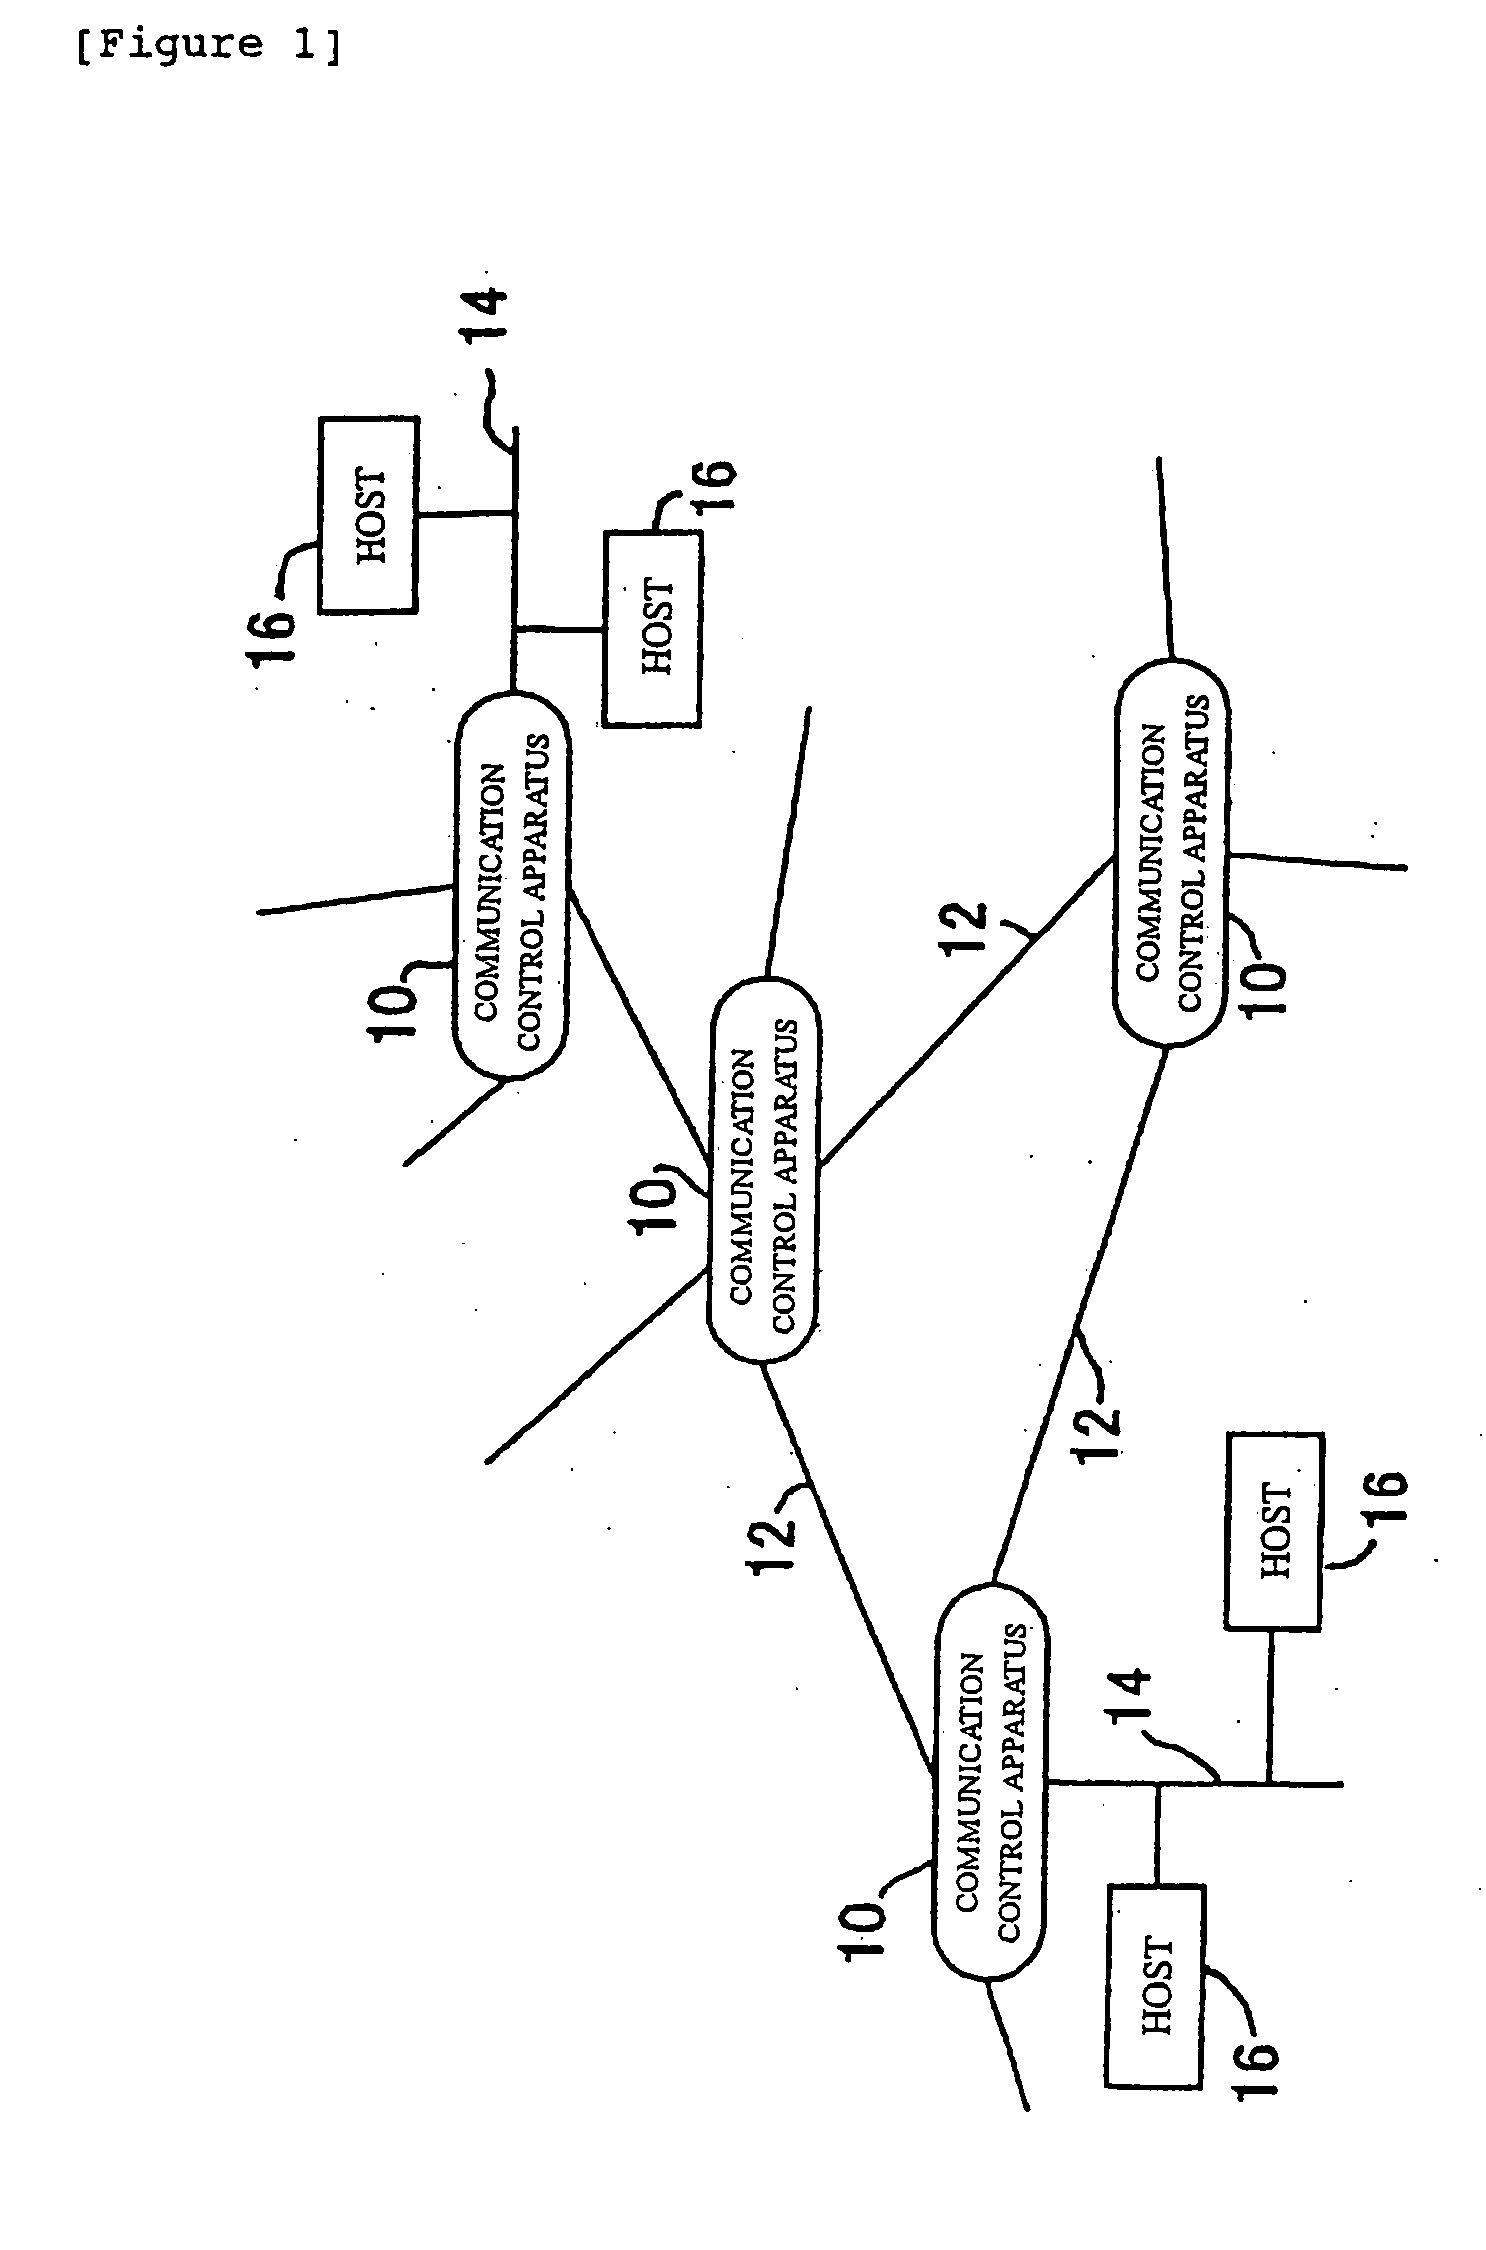 Communication control apparatus and method for searching an internet protocol address